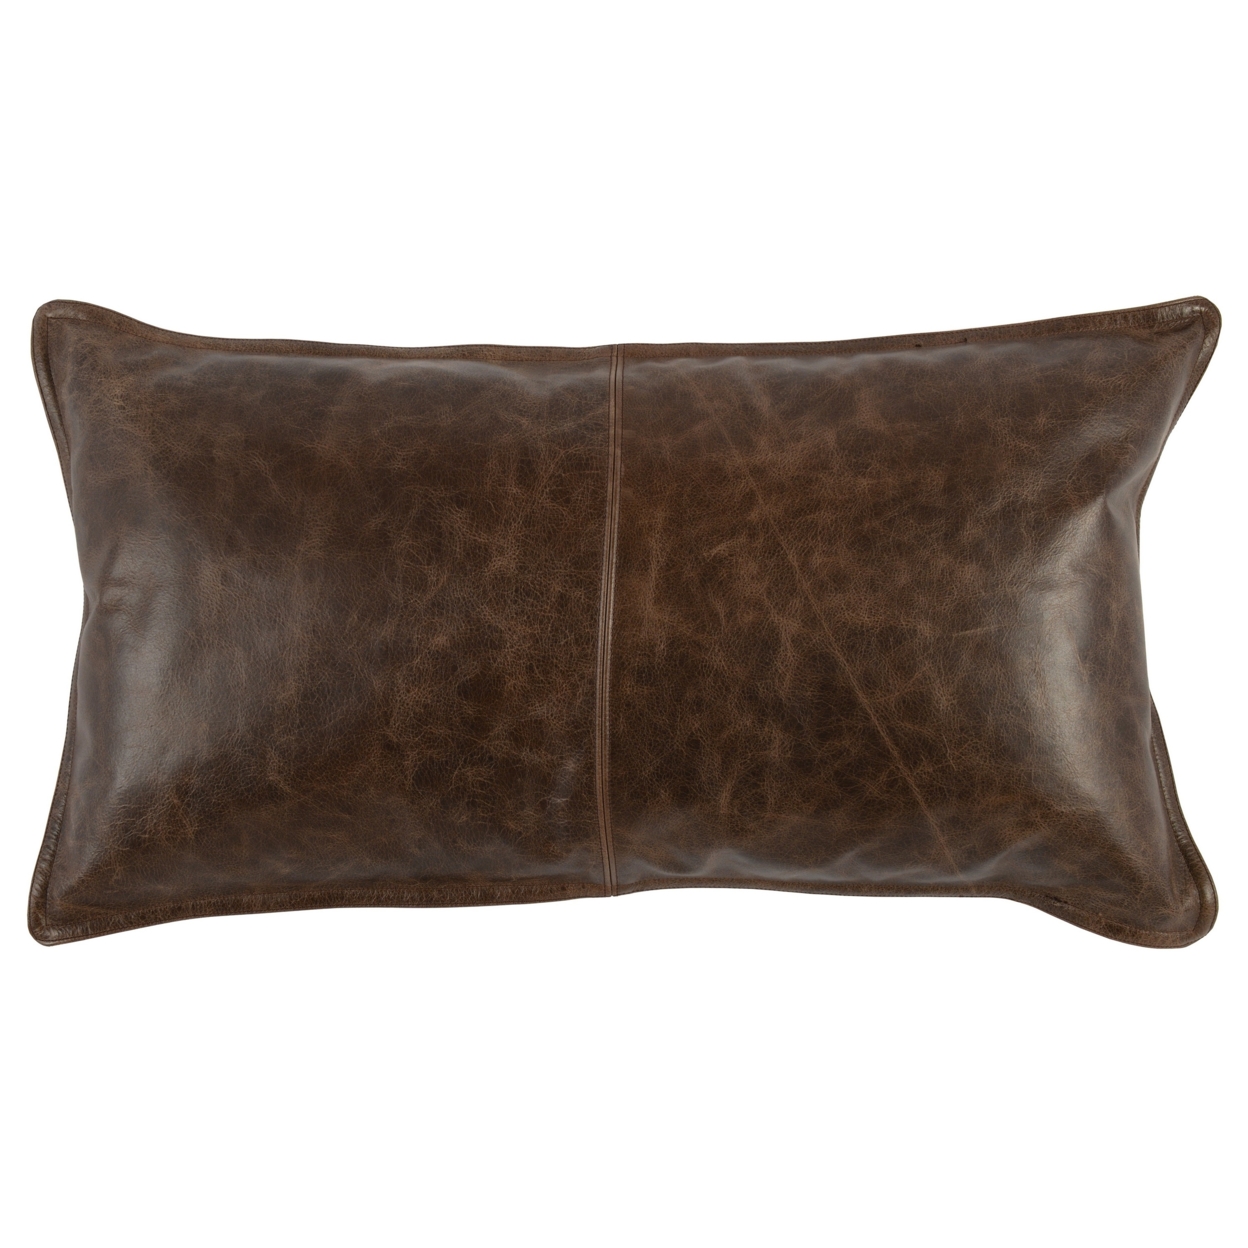 Leatherette Throw Pillow With Stitched Details And Flanged Edges,Dark Brown- Saltoro Sherpi